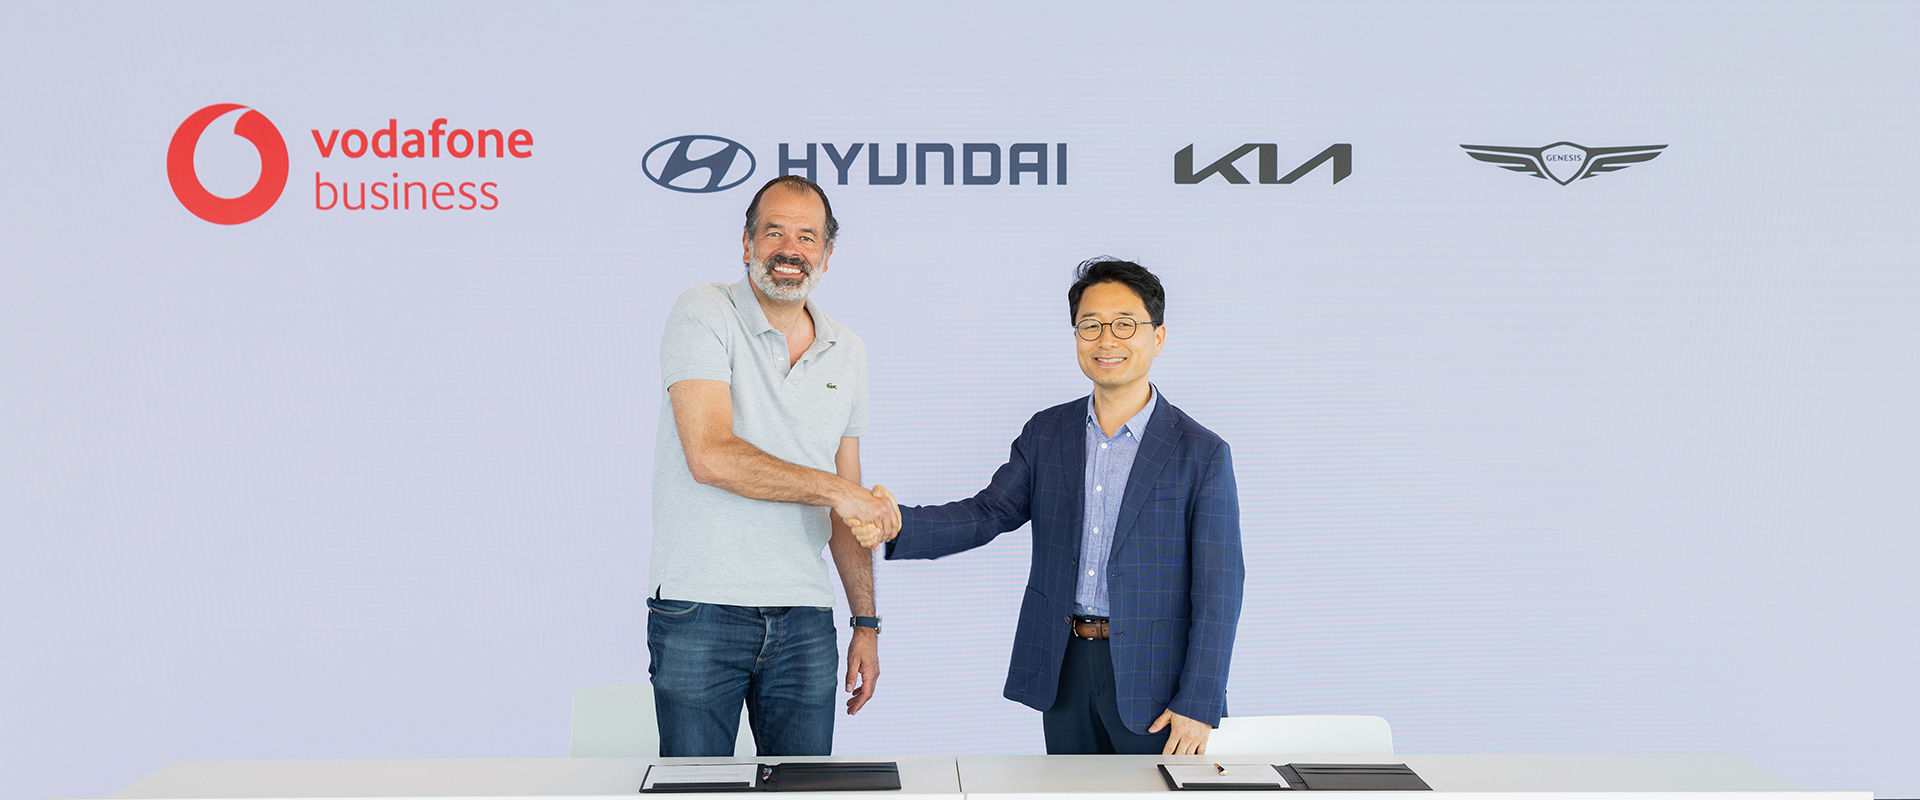 Hyundai Motor Group and Vodafone Business Expand Partnership, Bringing New In-car Infotainment Services to Customers in Europe